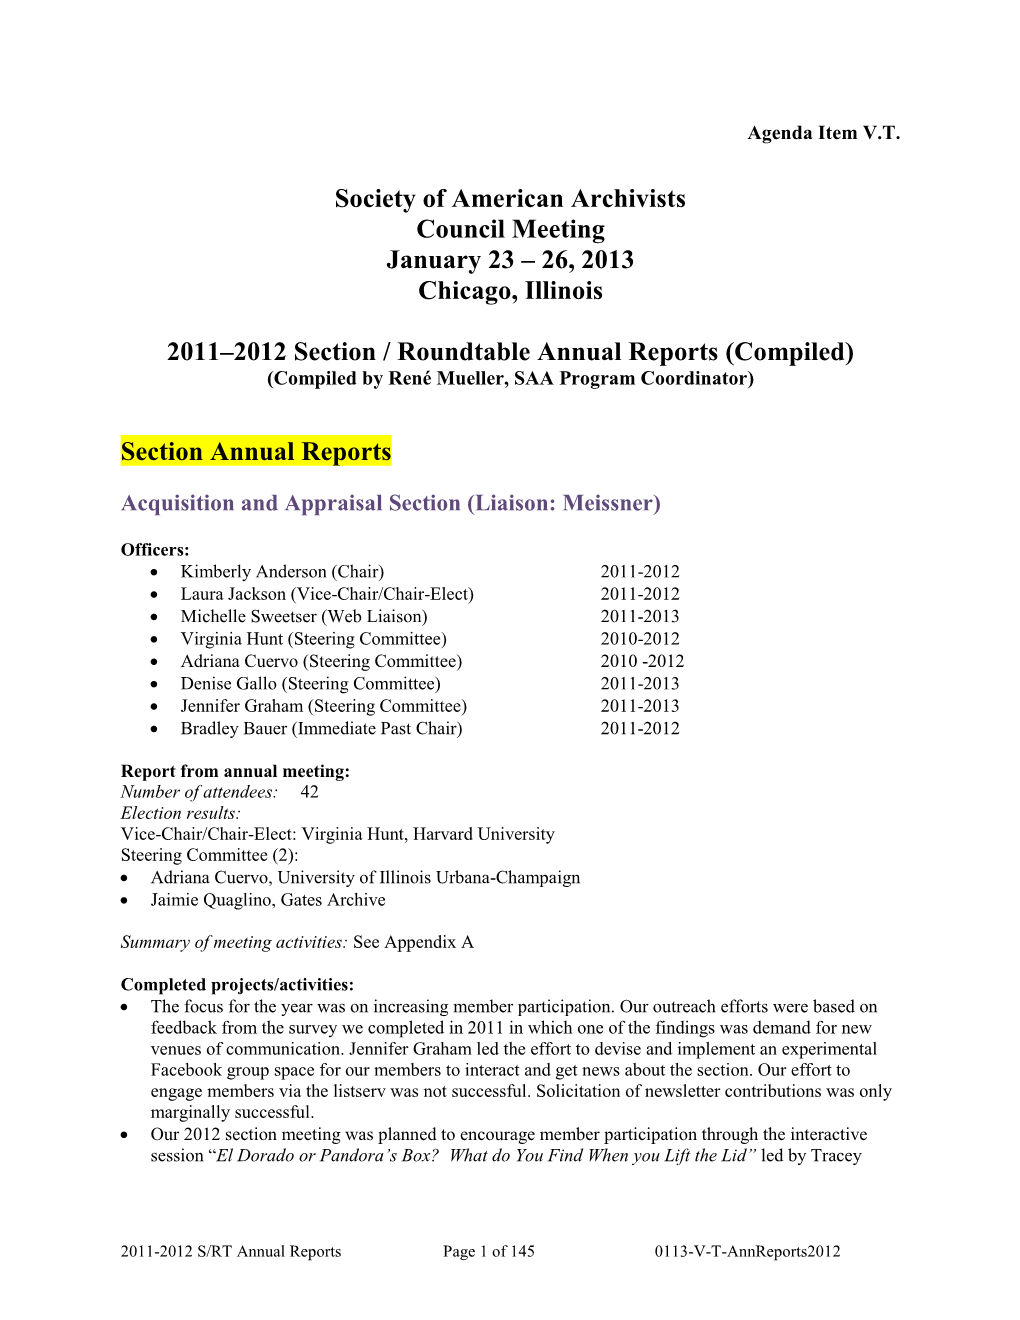 2006 Component Annual Reports